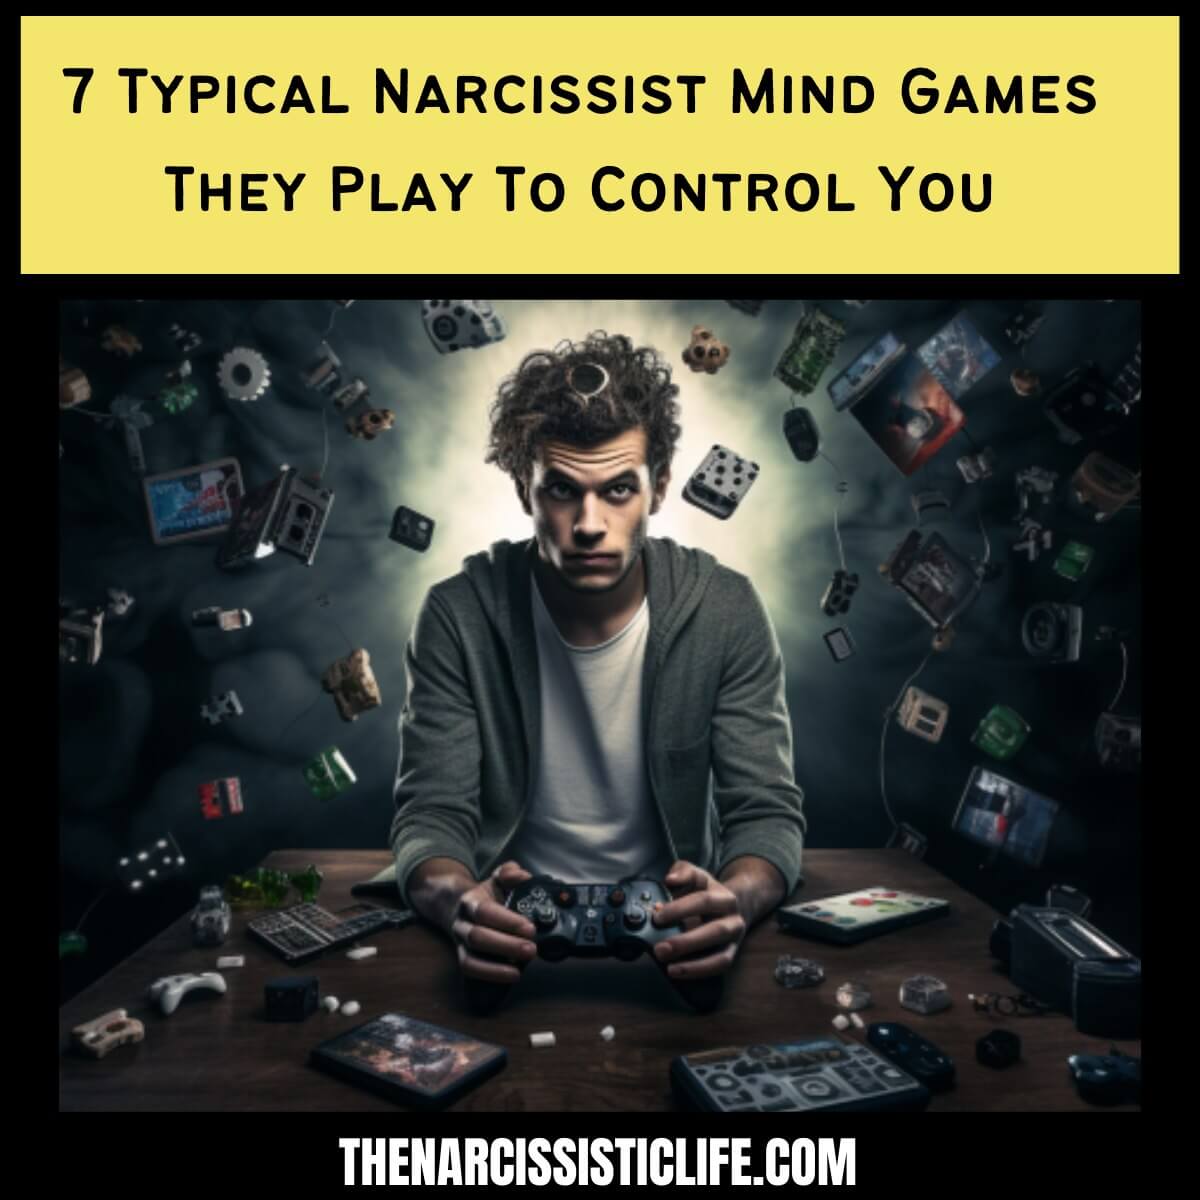 7 Typical Narcissist Mind Games They Play To Control You